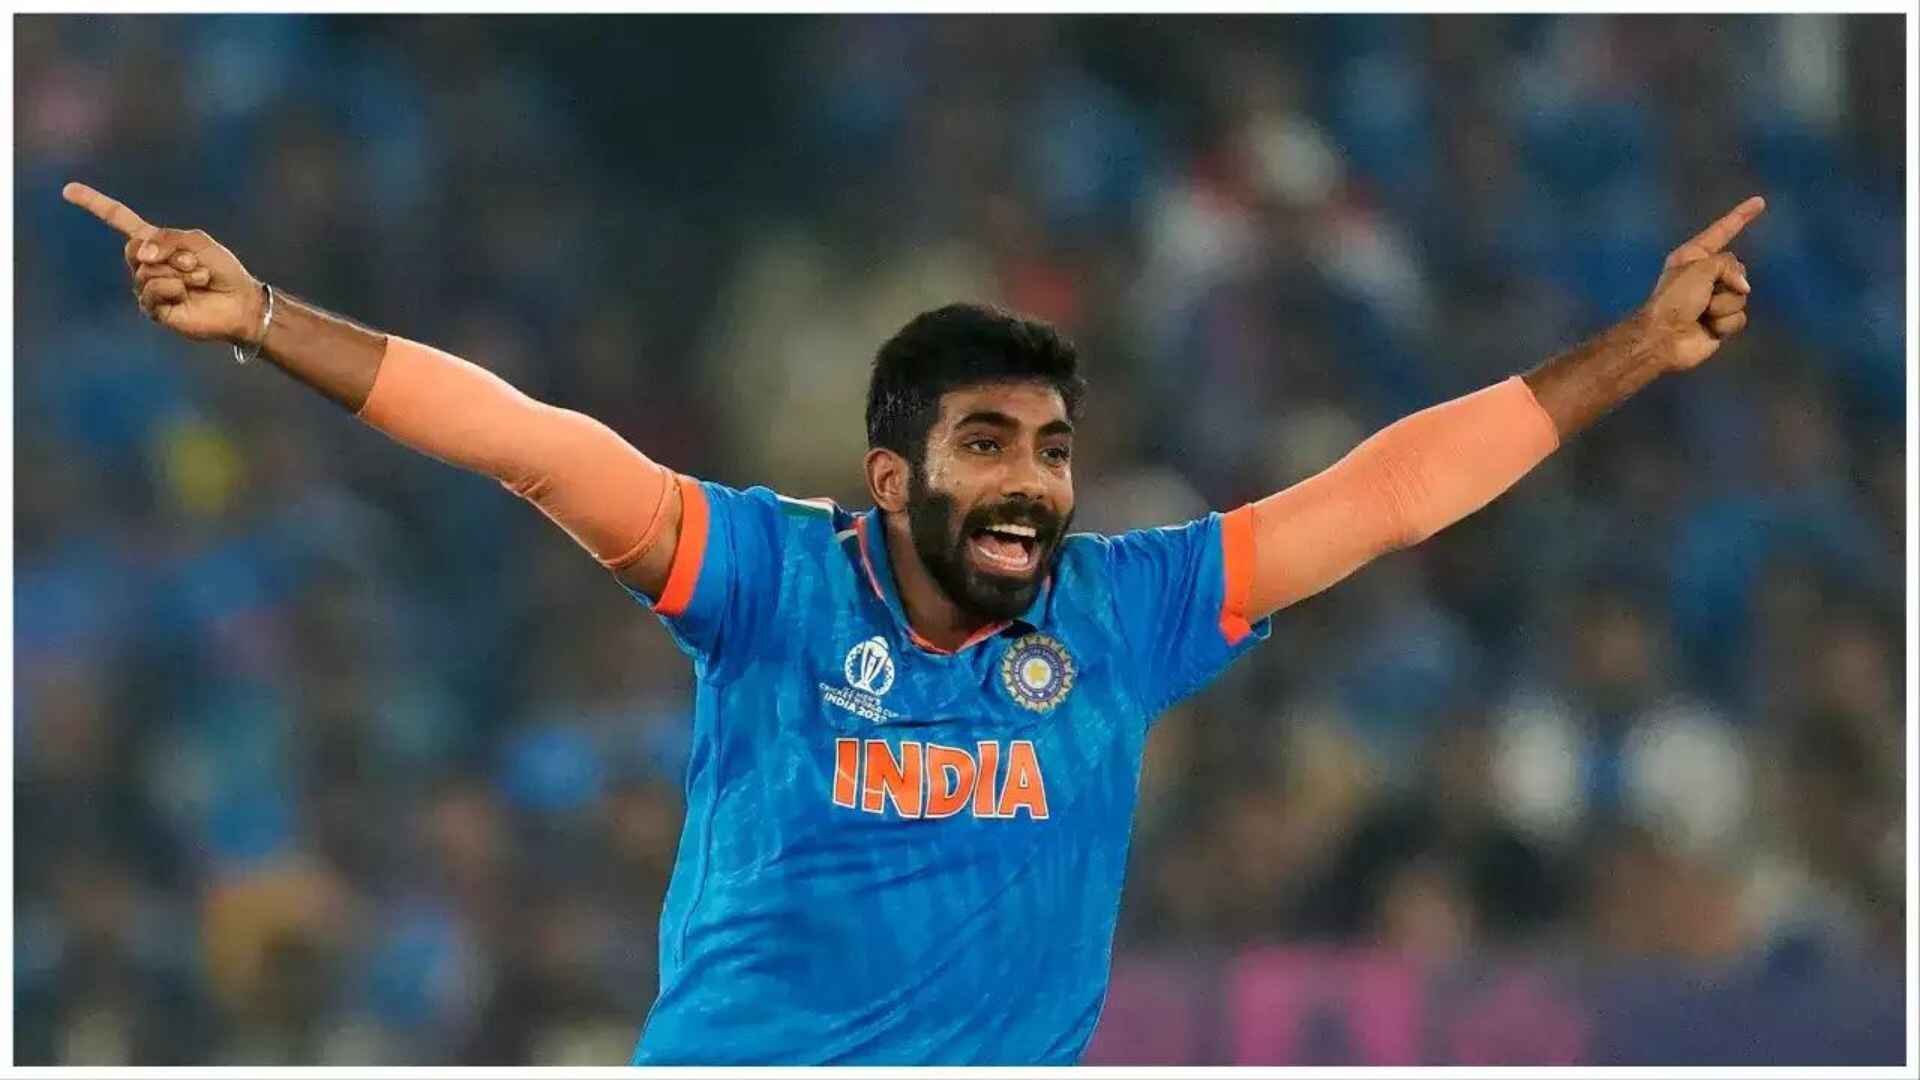 T20 World Cup: 'Bumrah ki kala' Former Cricketer Praises India's Pace Spearhead